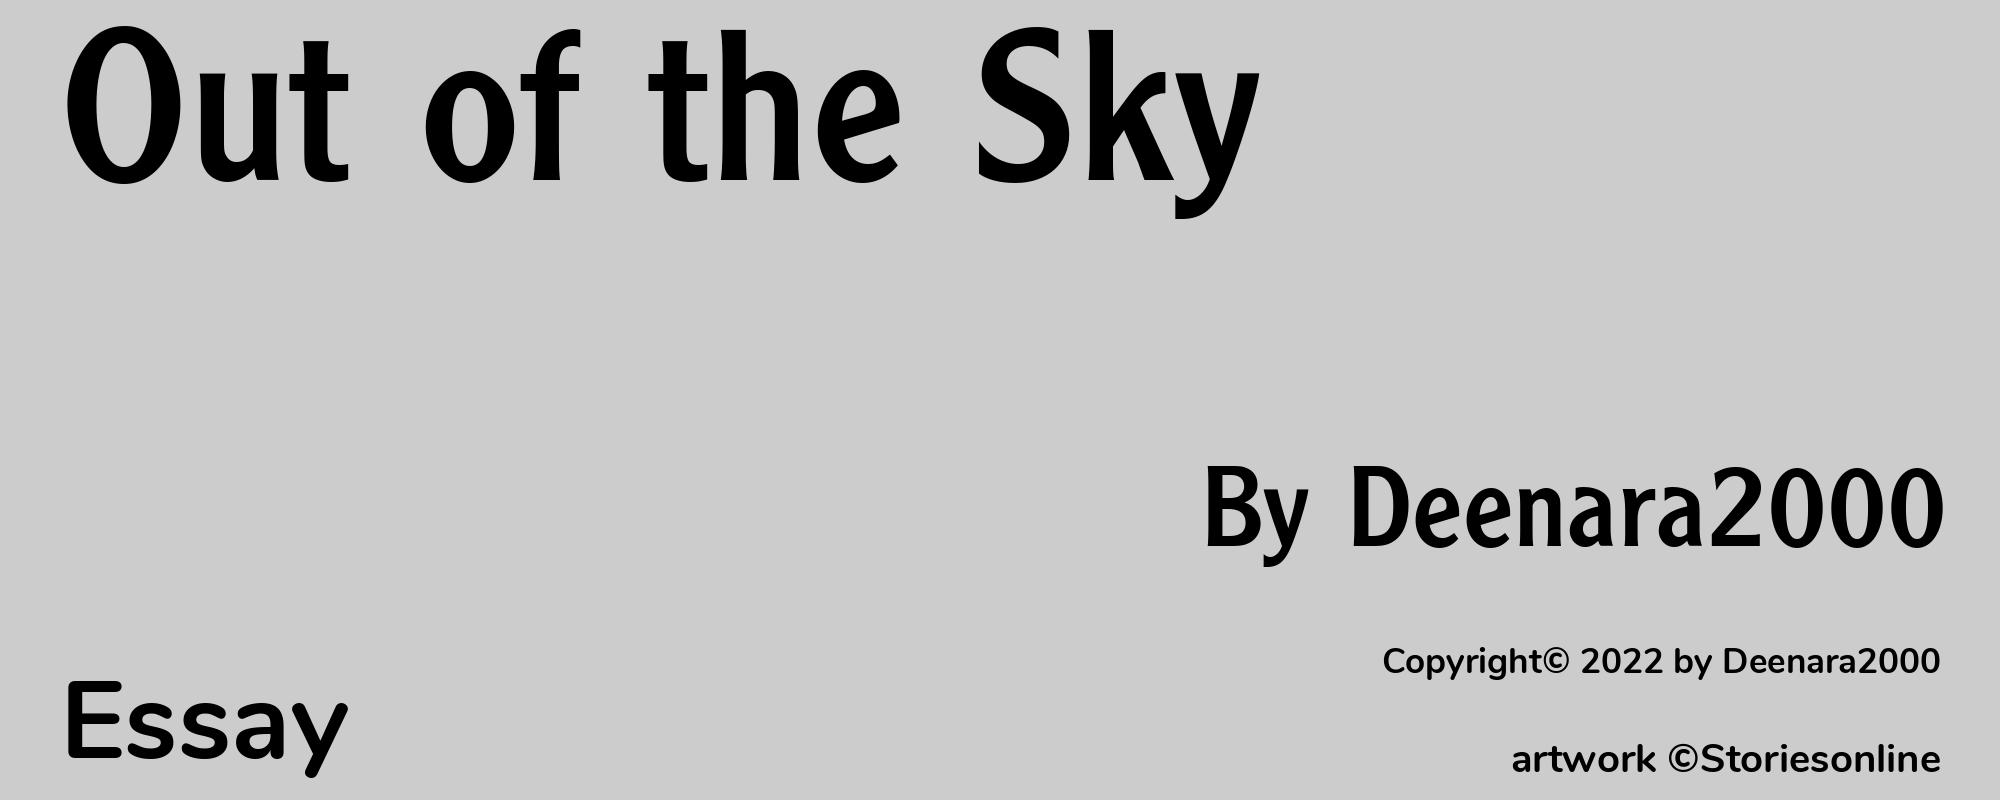 Out of the Sky - Cover